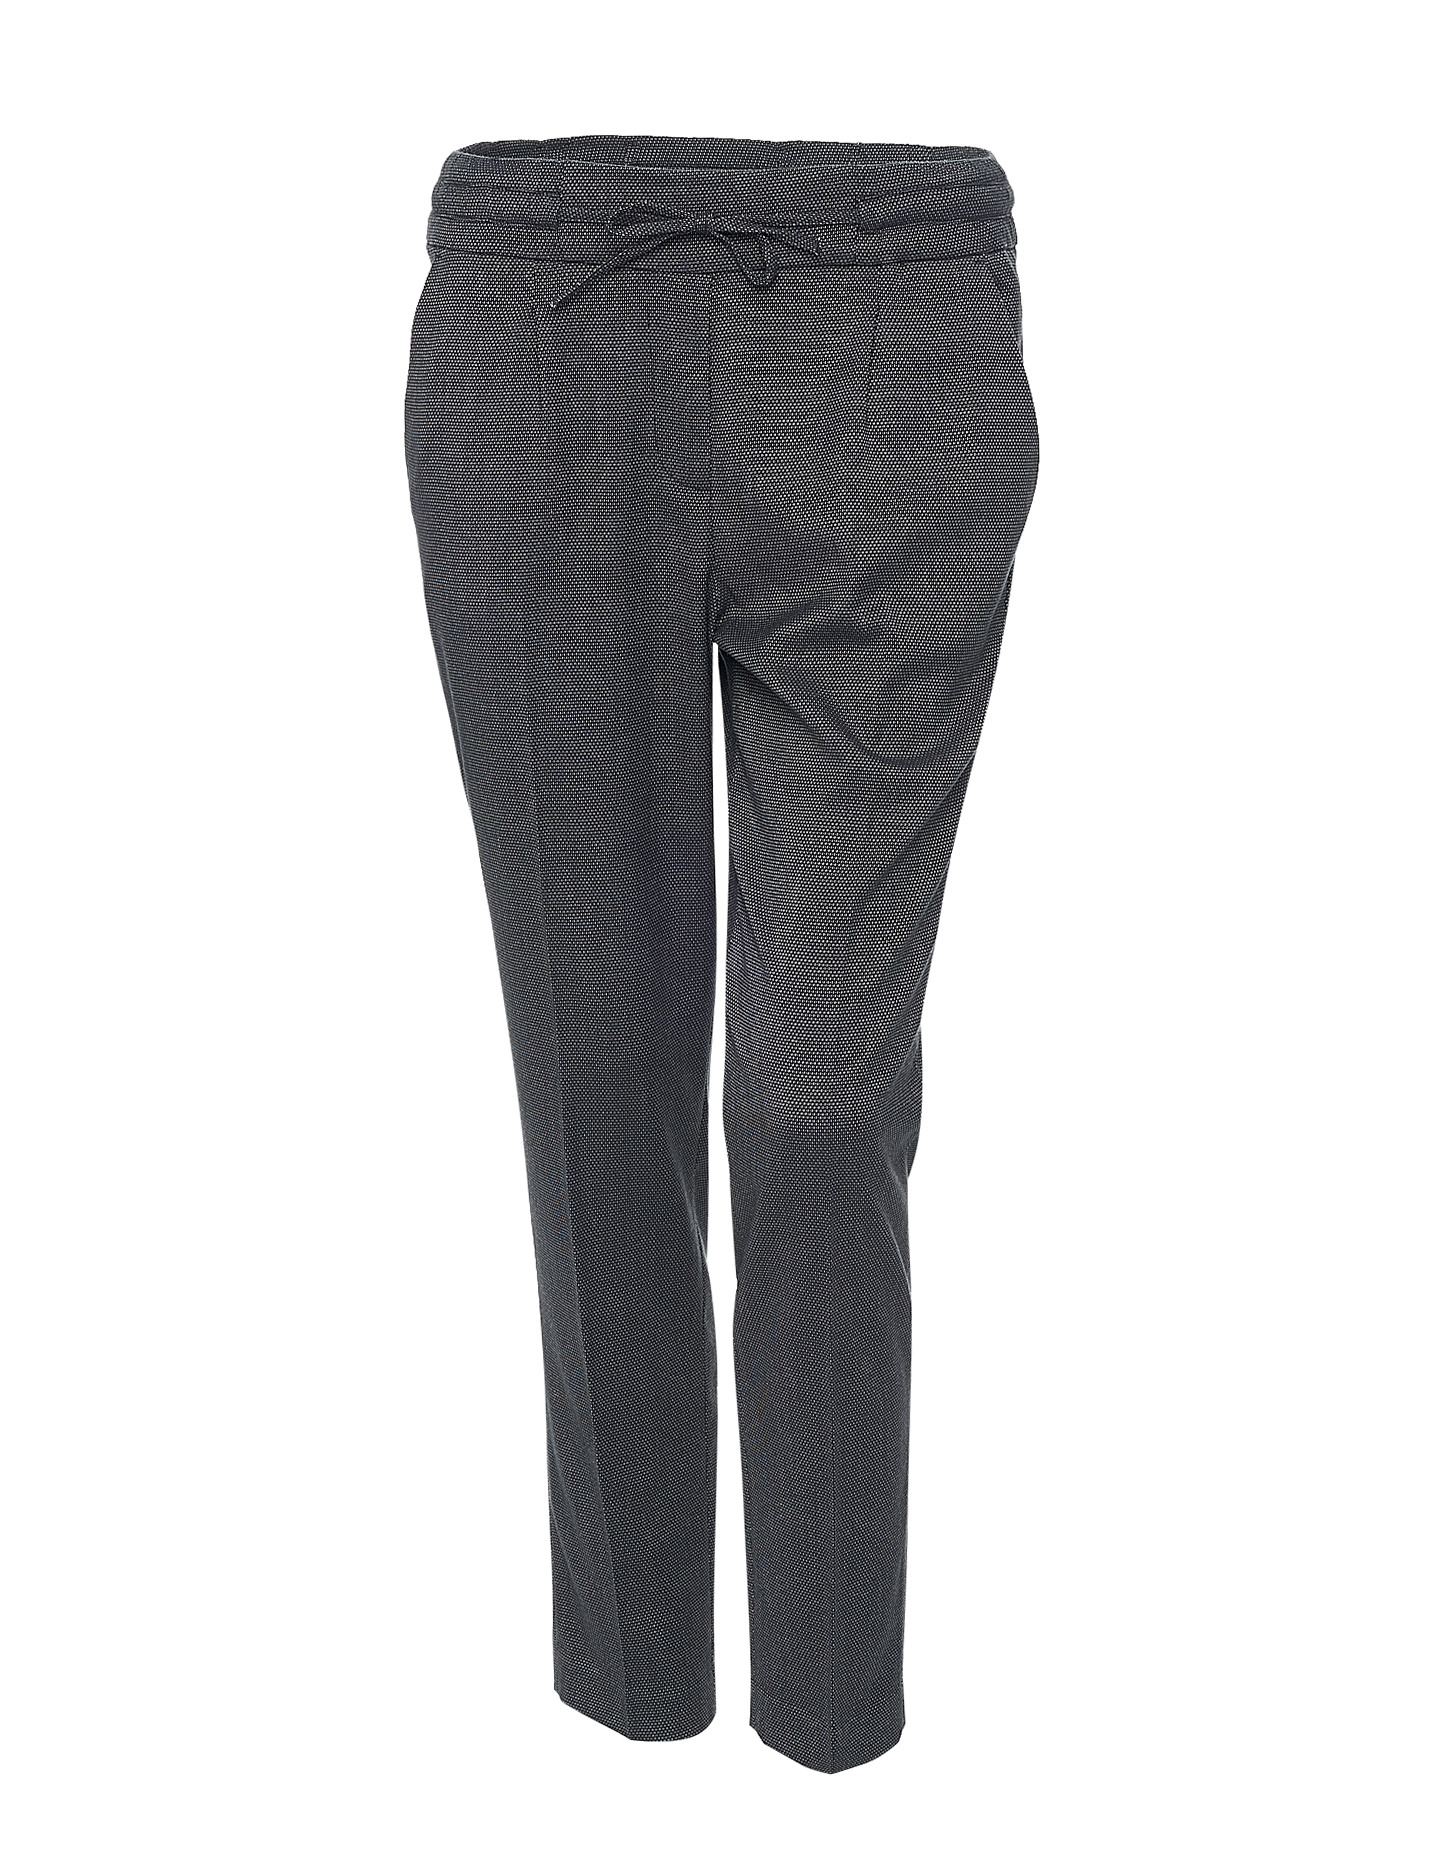 Business trousers Melosa pepita black by OPUS | shop your favourites online